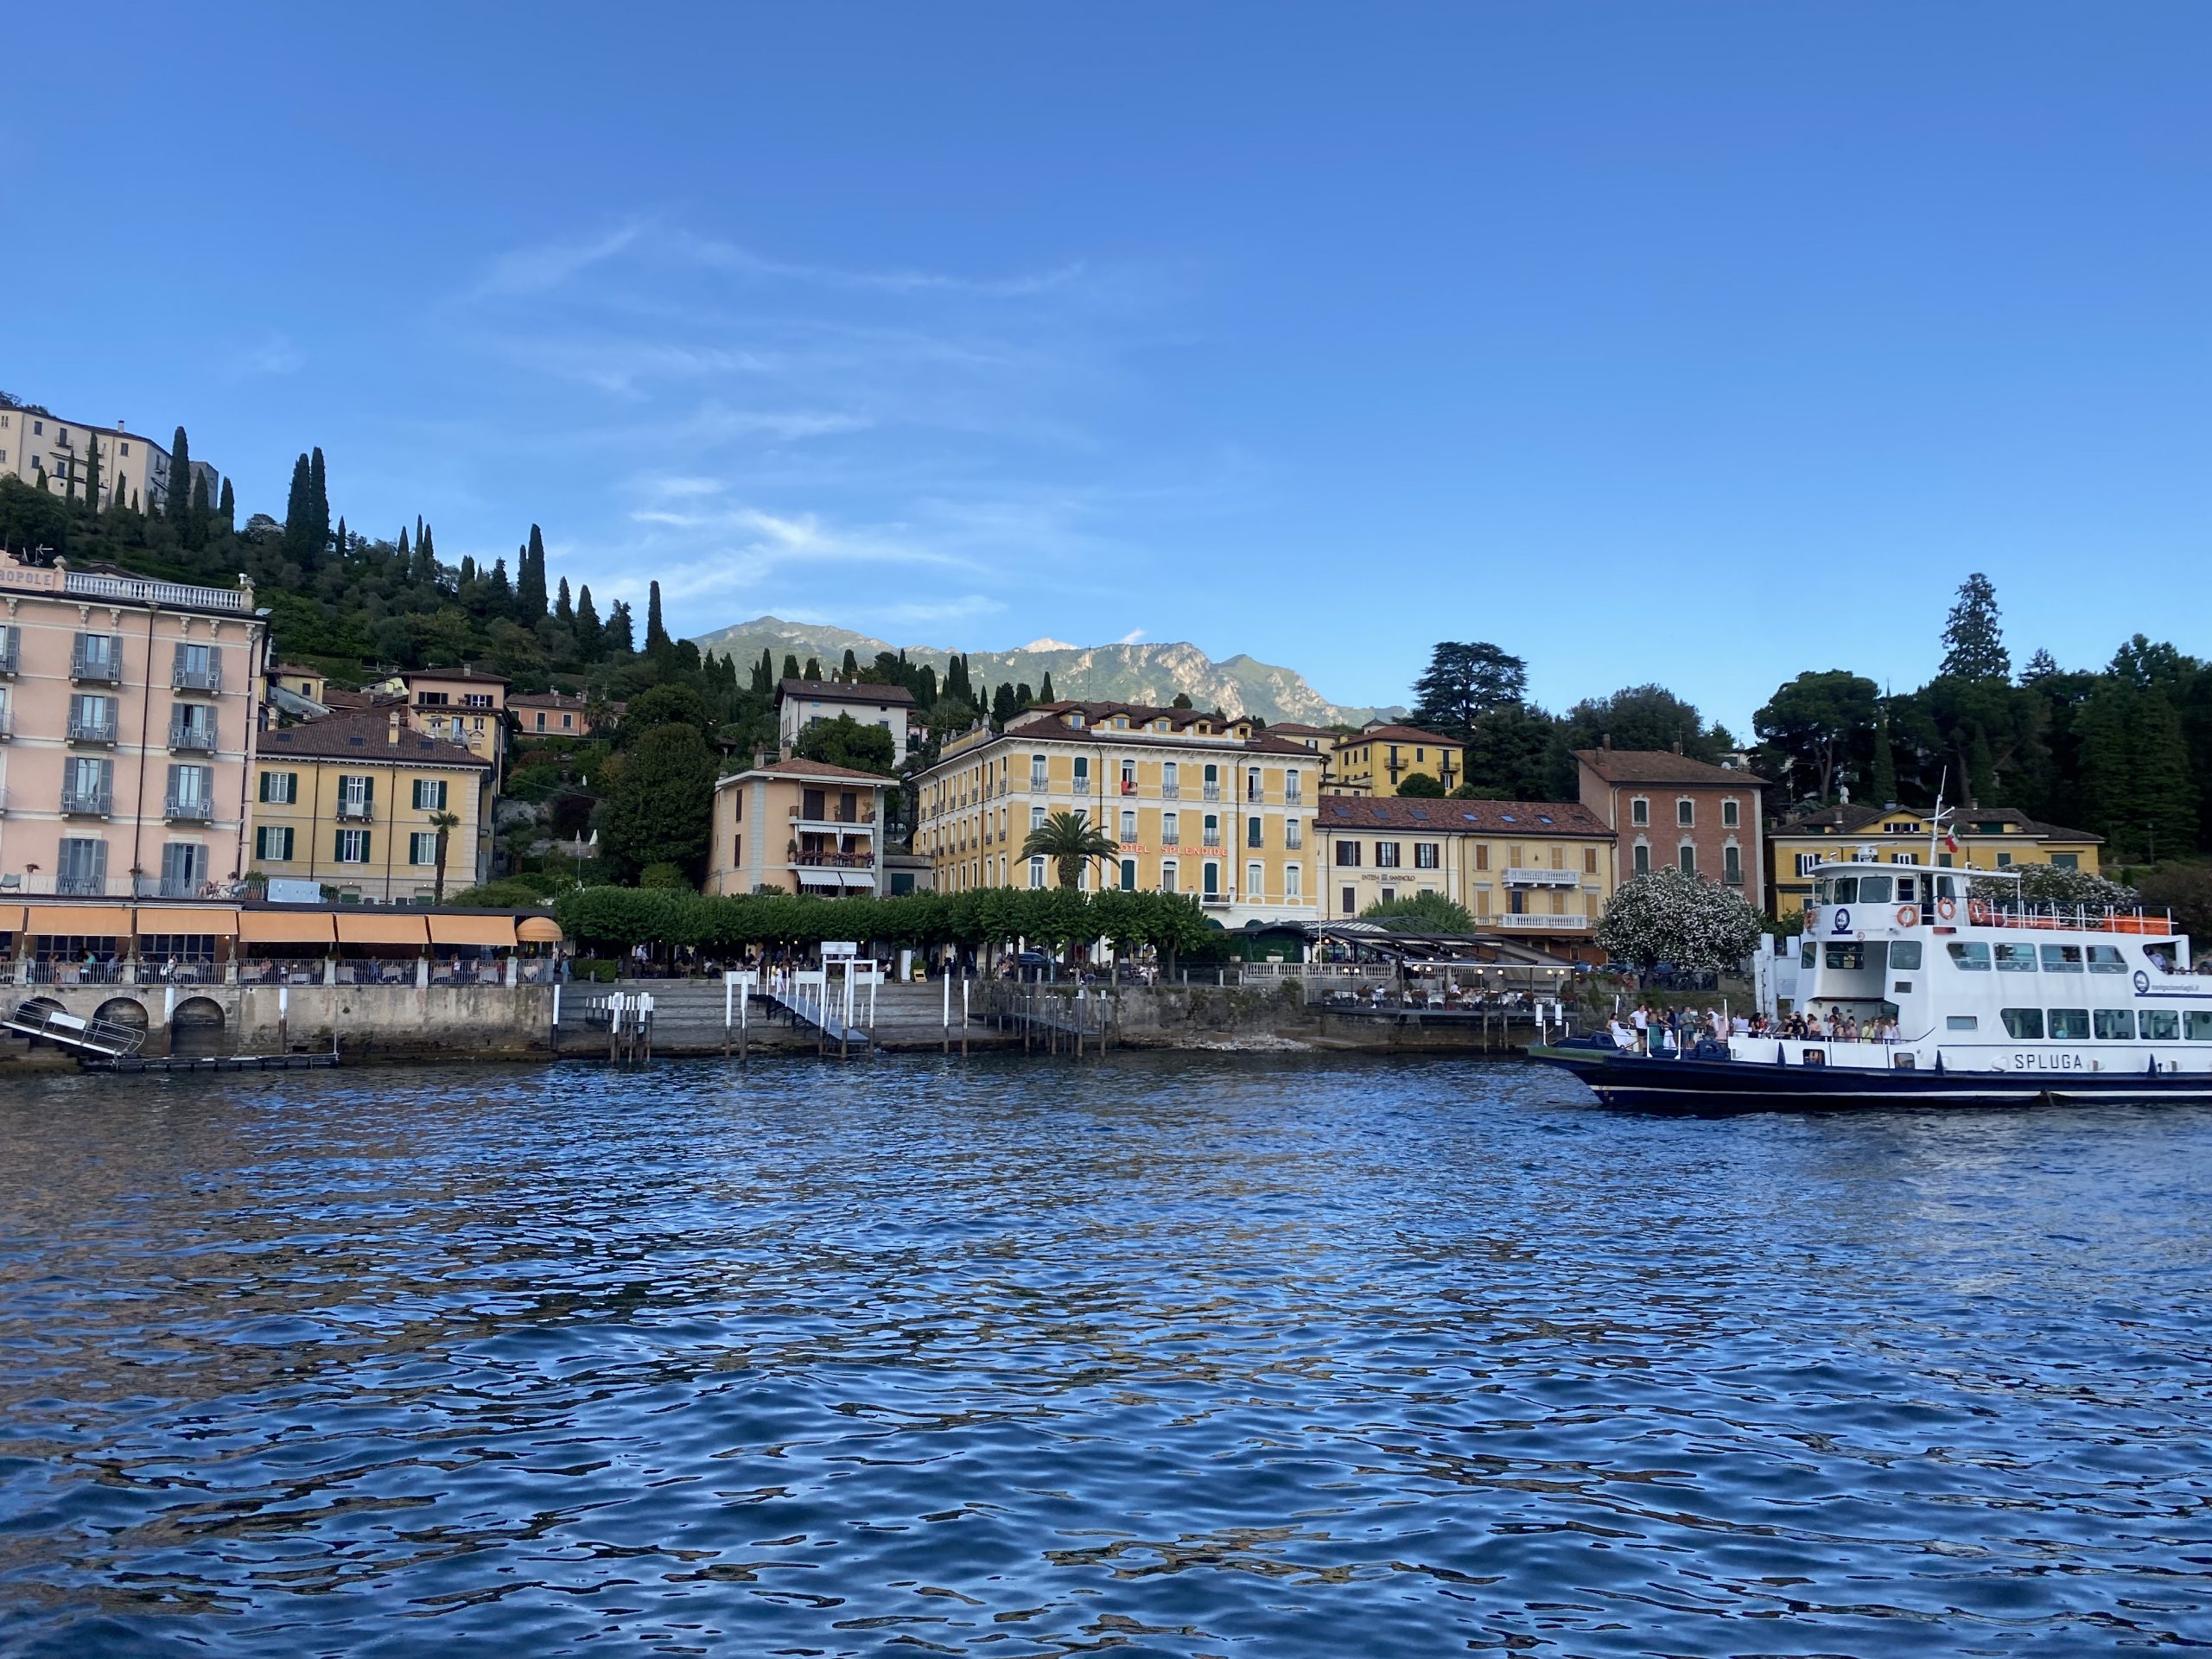 An italian town with a lake in the foreground and a ferry departing.